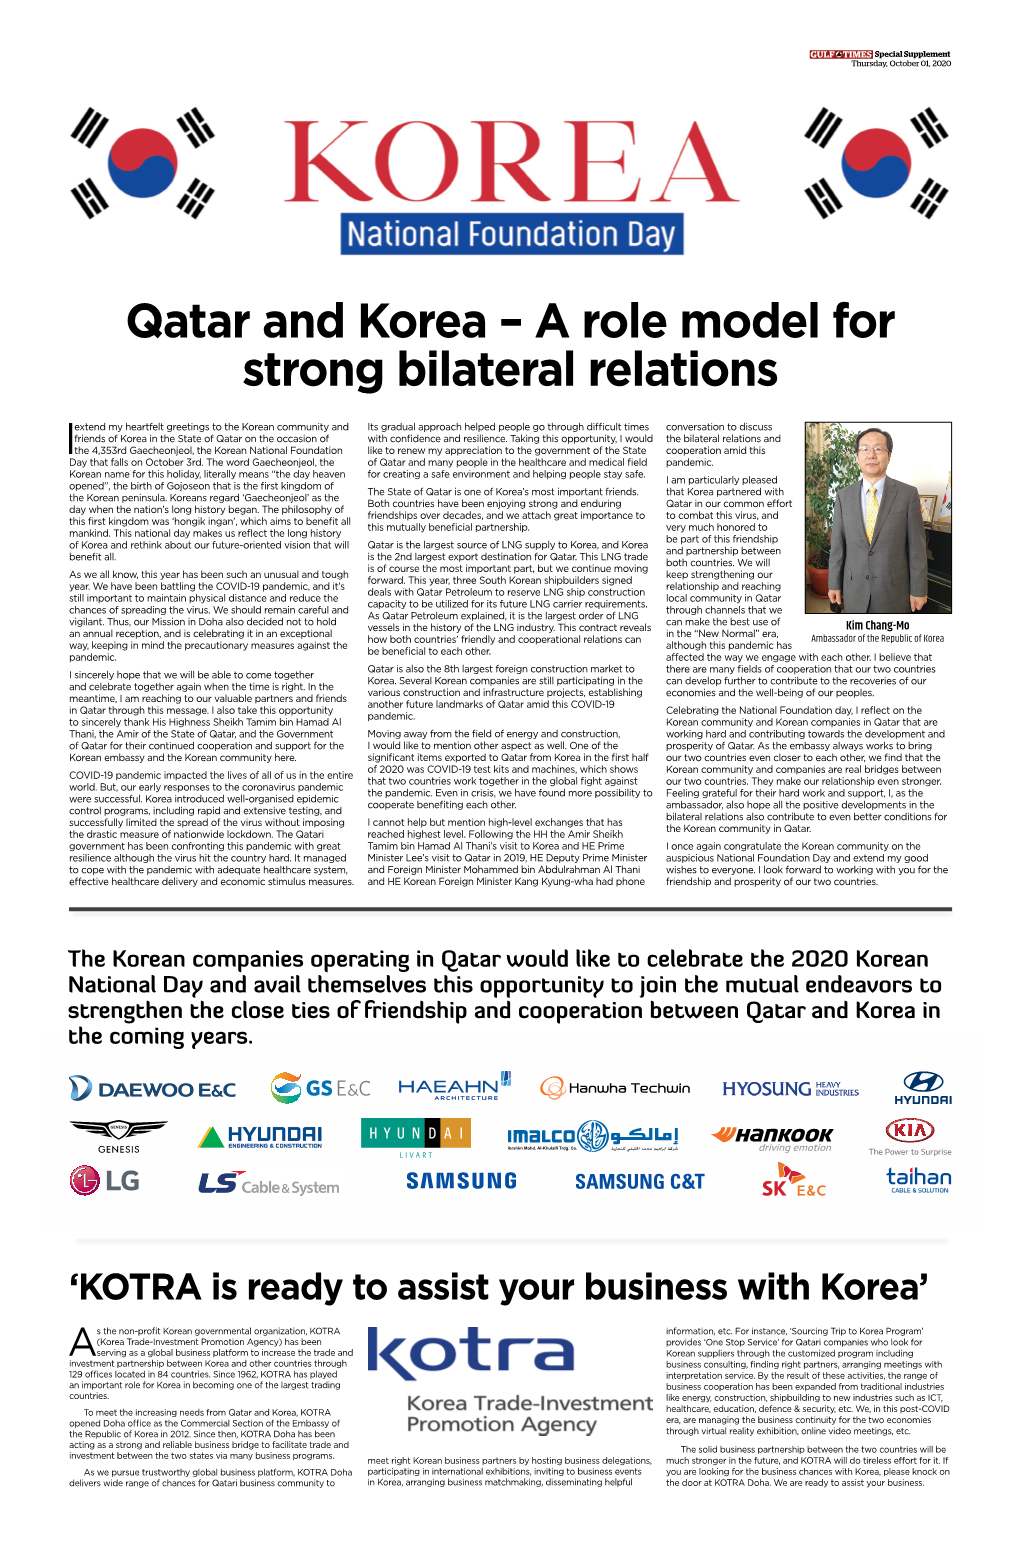 Qatar and Korea – a Role Model for Strong Bilateral Relations